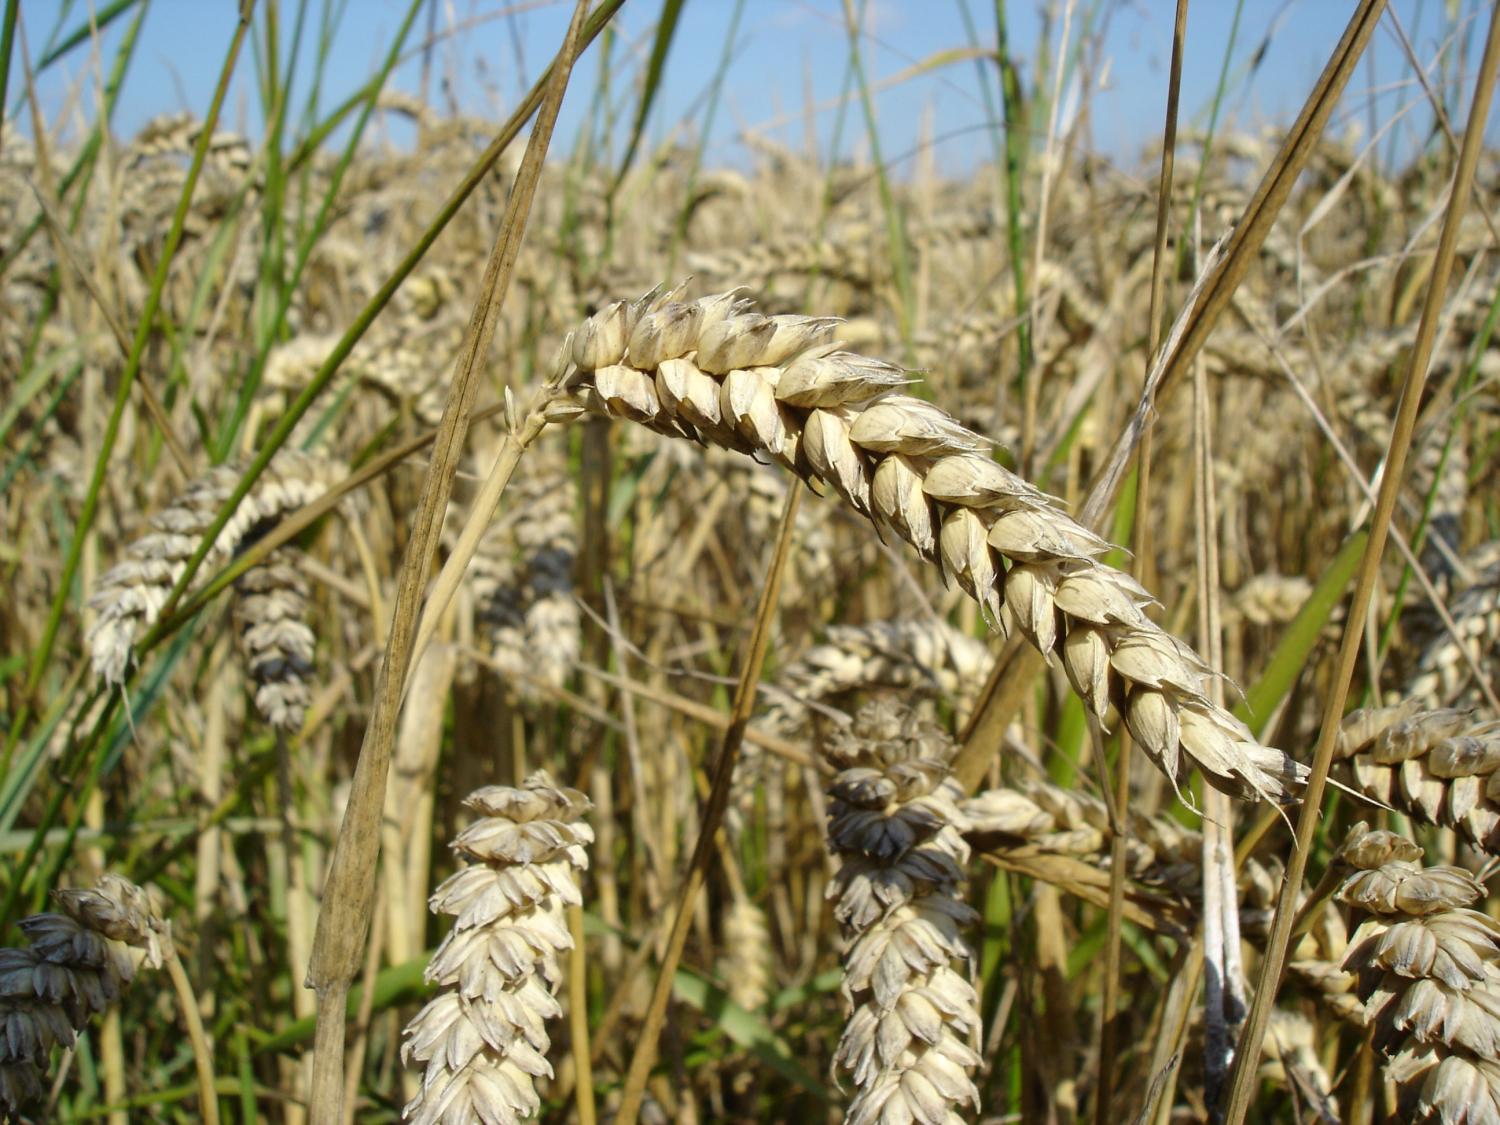 New research shows how disruption in wheat trade can affect food security